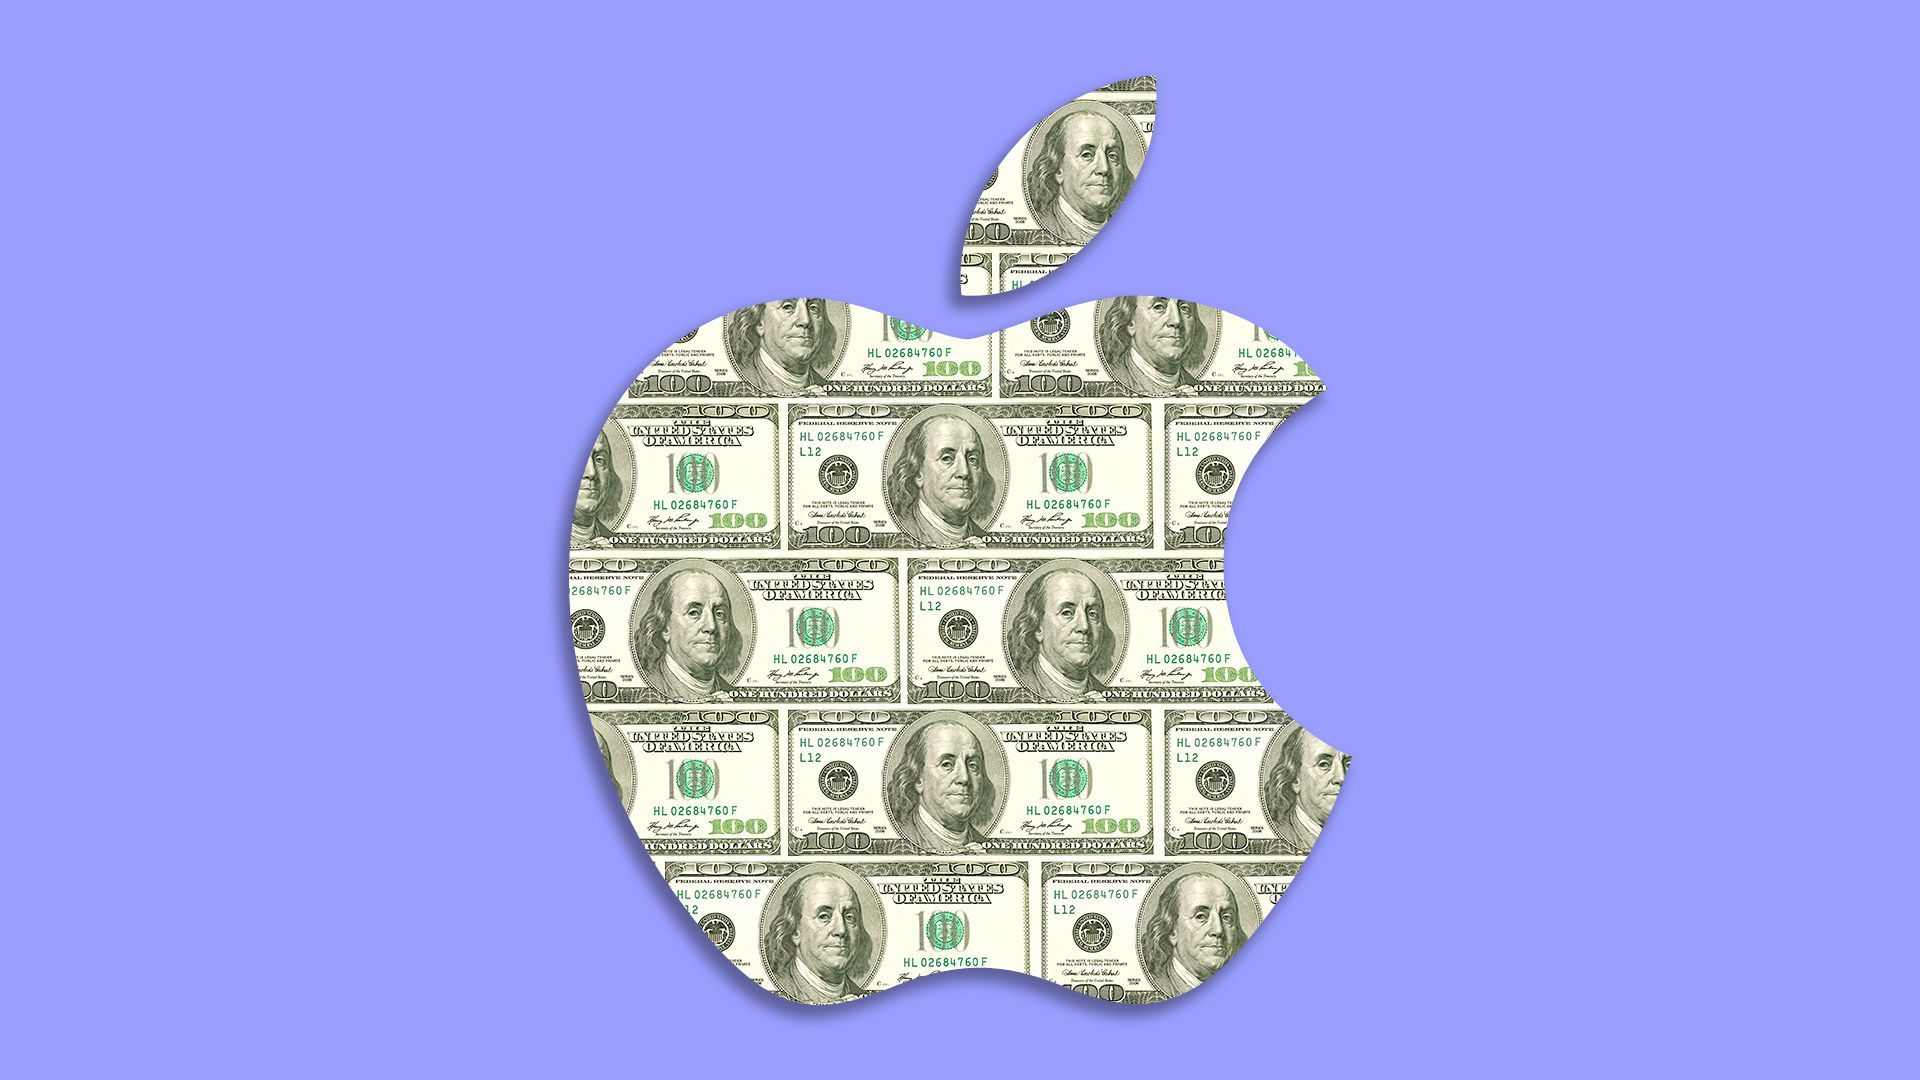 Illustration of the Apple logo made out of a repeating hundred dollar bill pattern. 